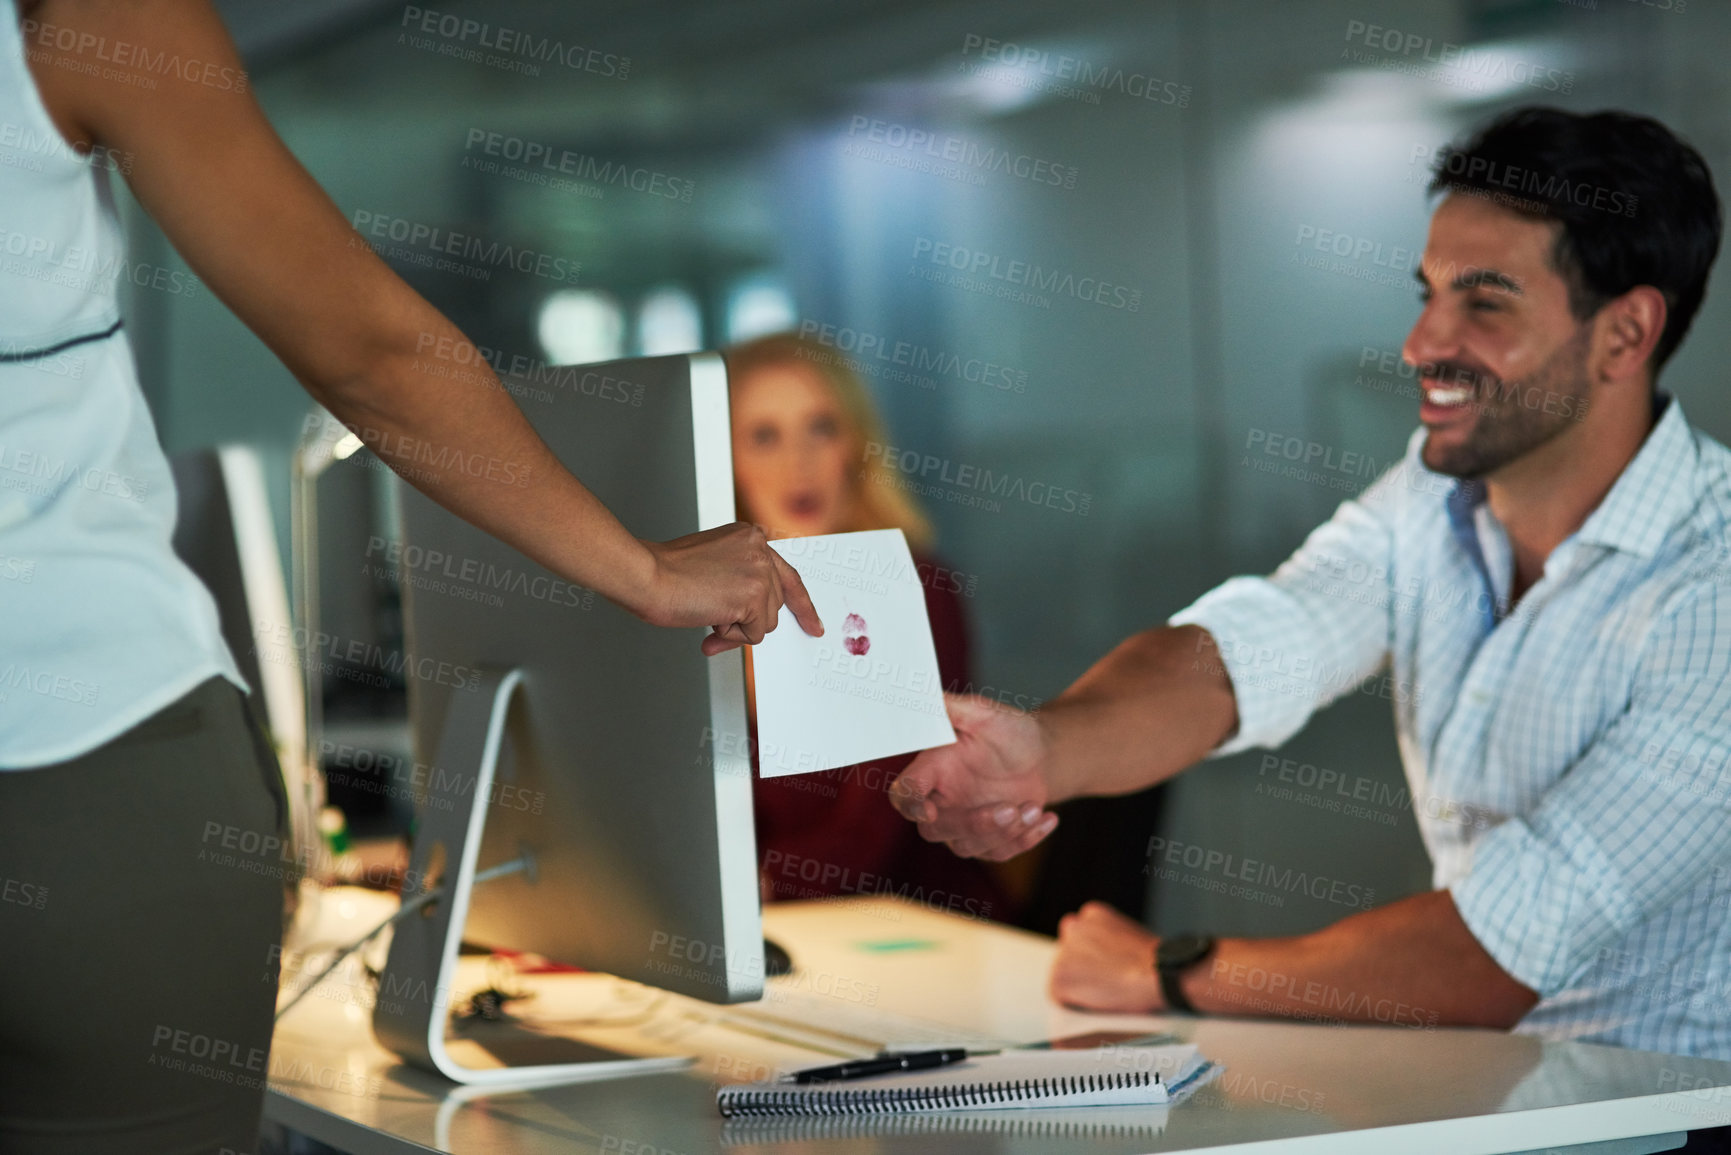 Buy stock photo Shot of a love note being passed from one colleague to another